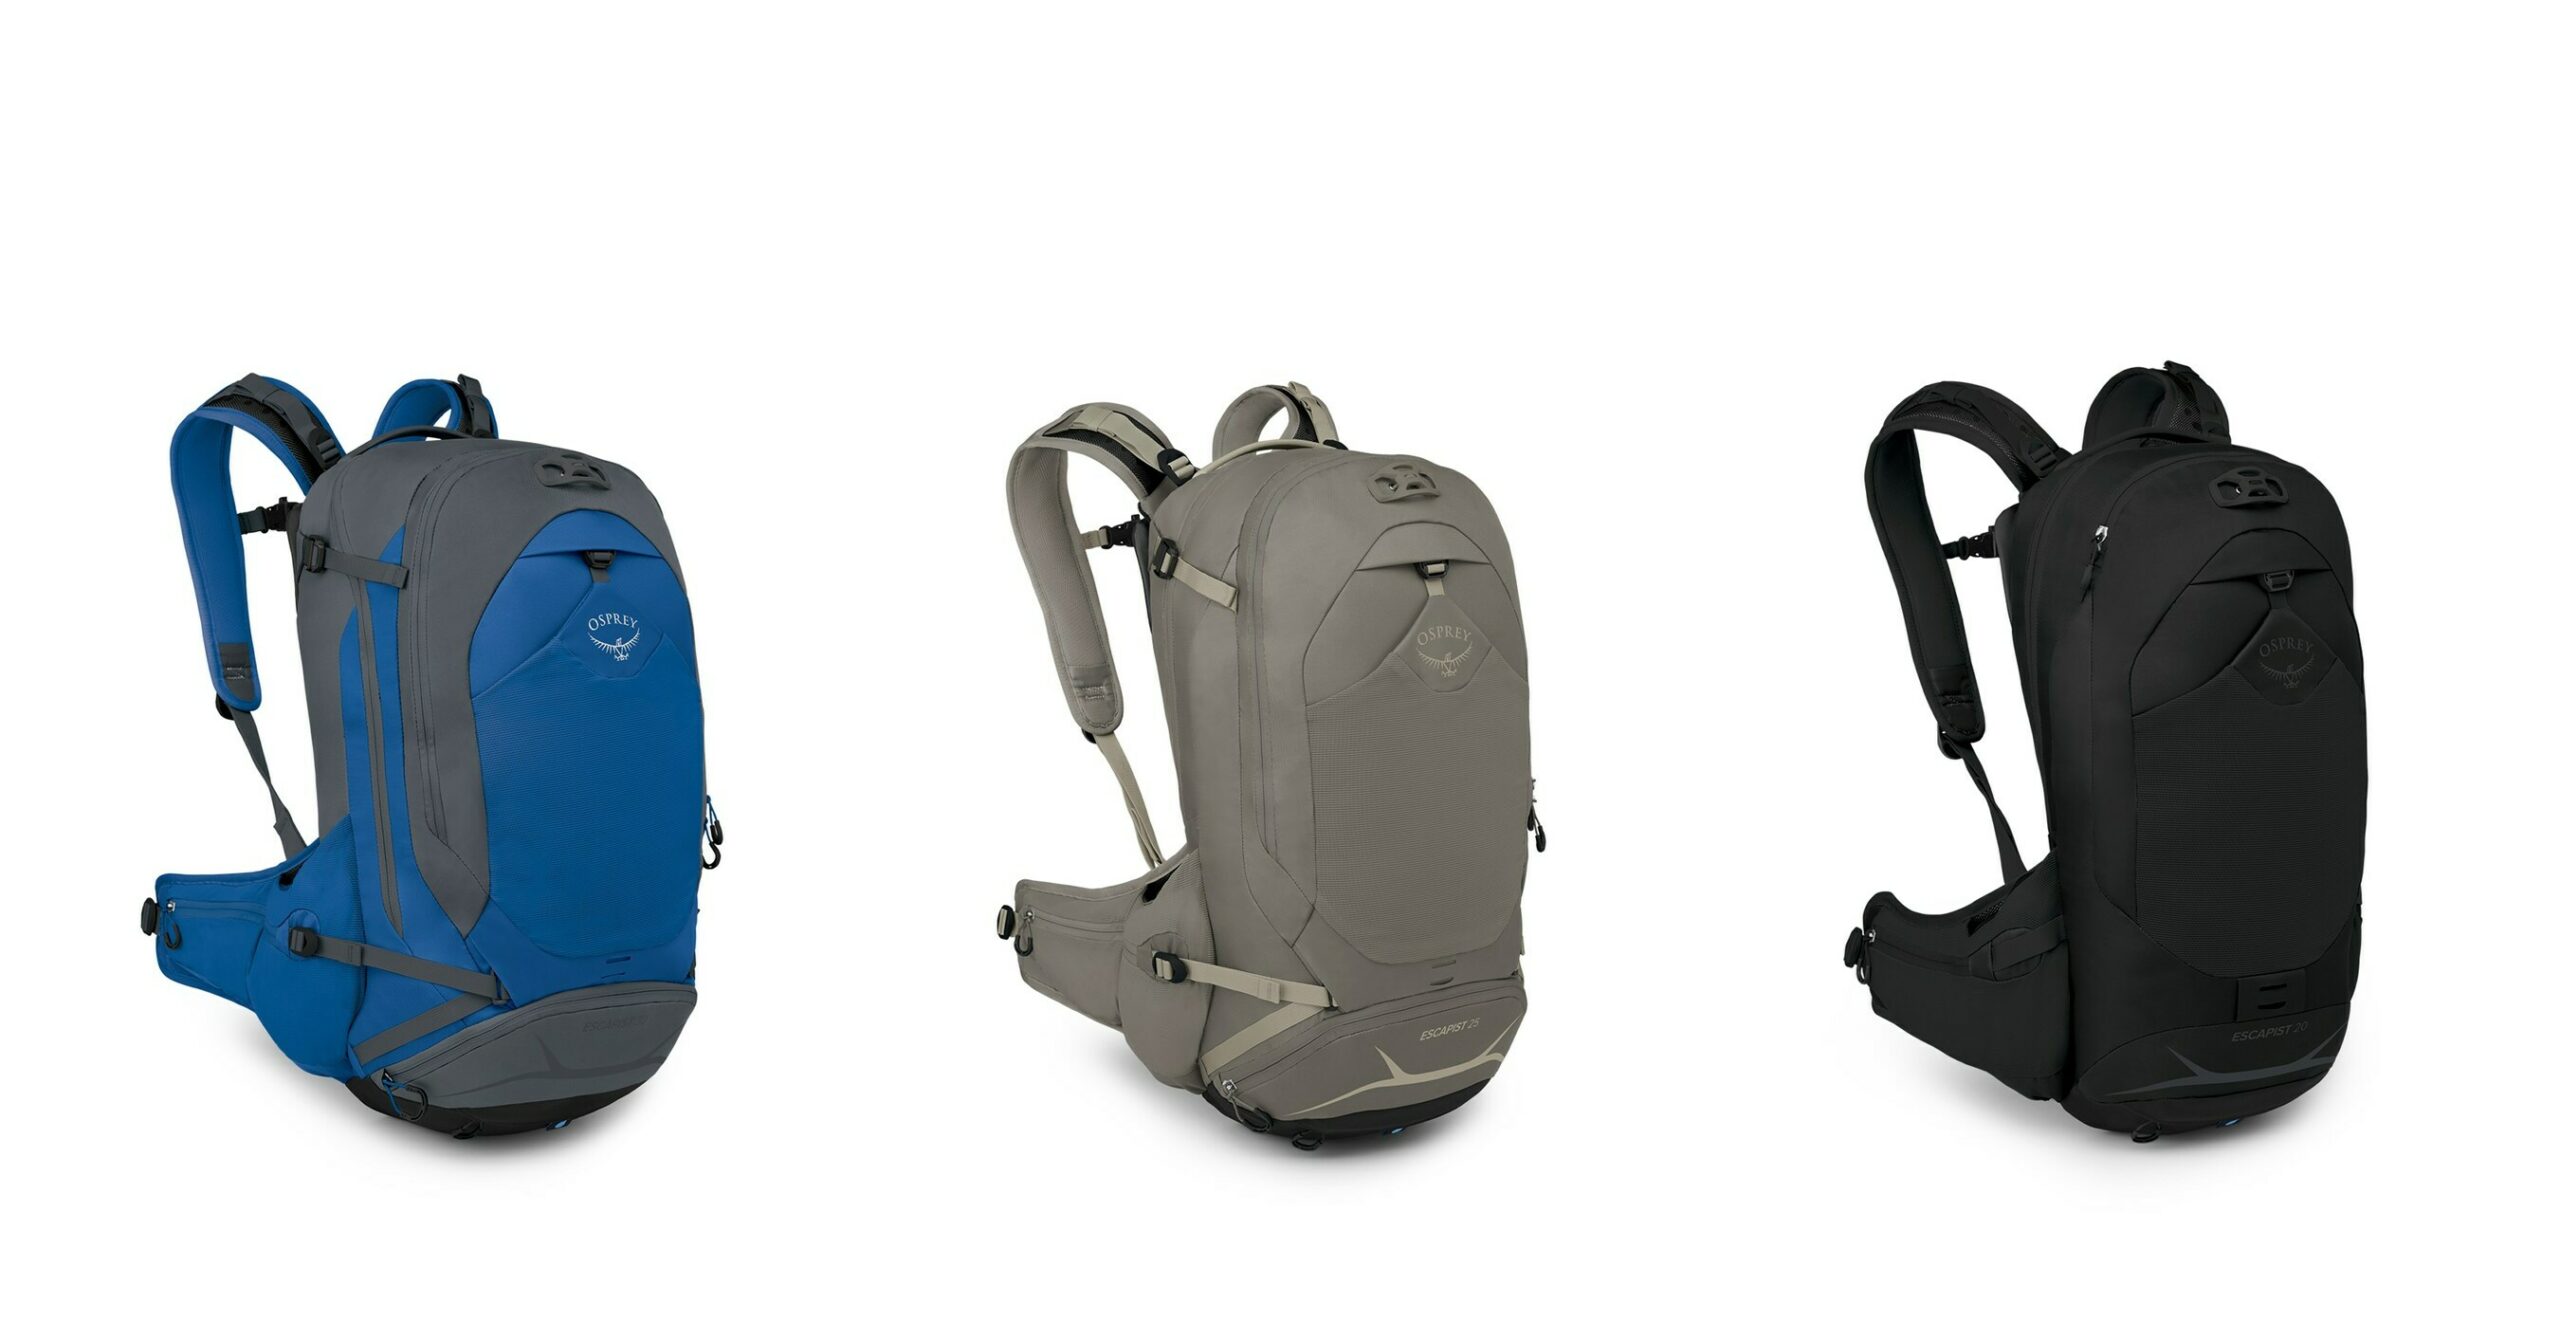 Osprey Packs expands its technical cycling pack range with the Escapist collection, and Extended Fit sizes in its Raptor | Raven series.